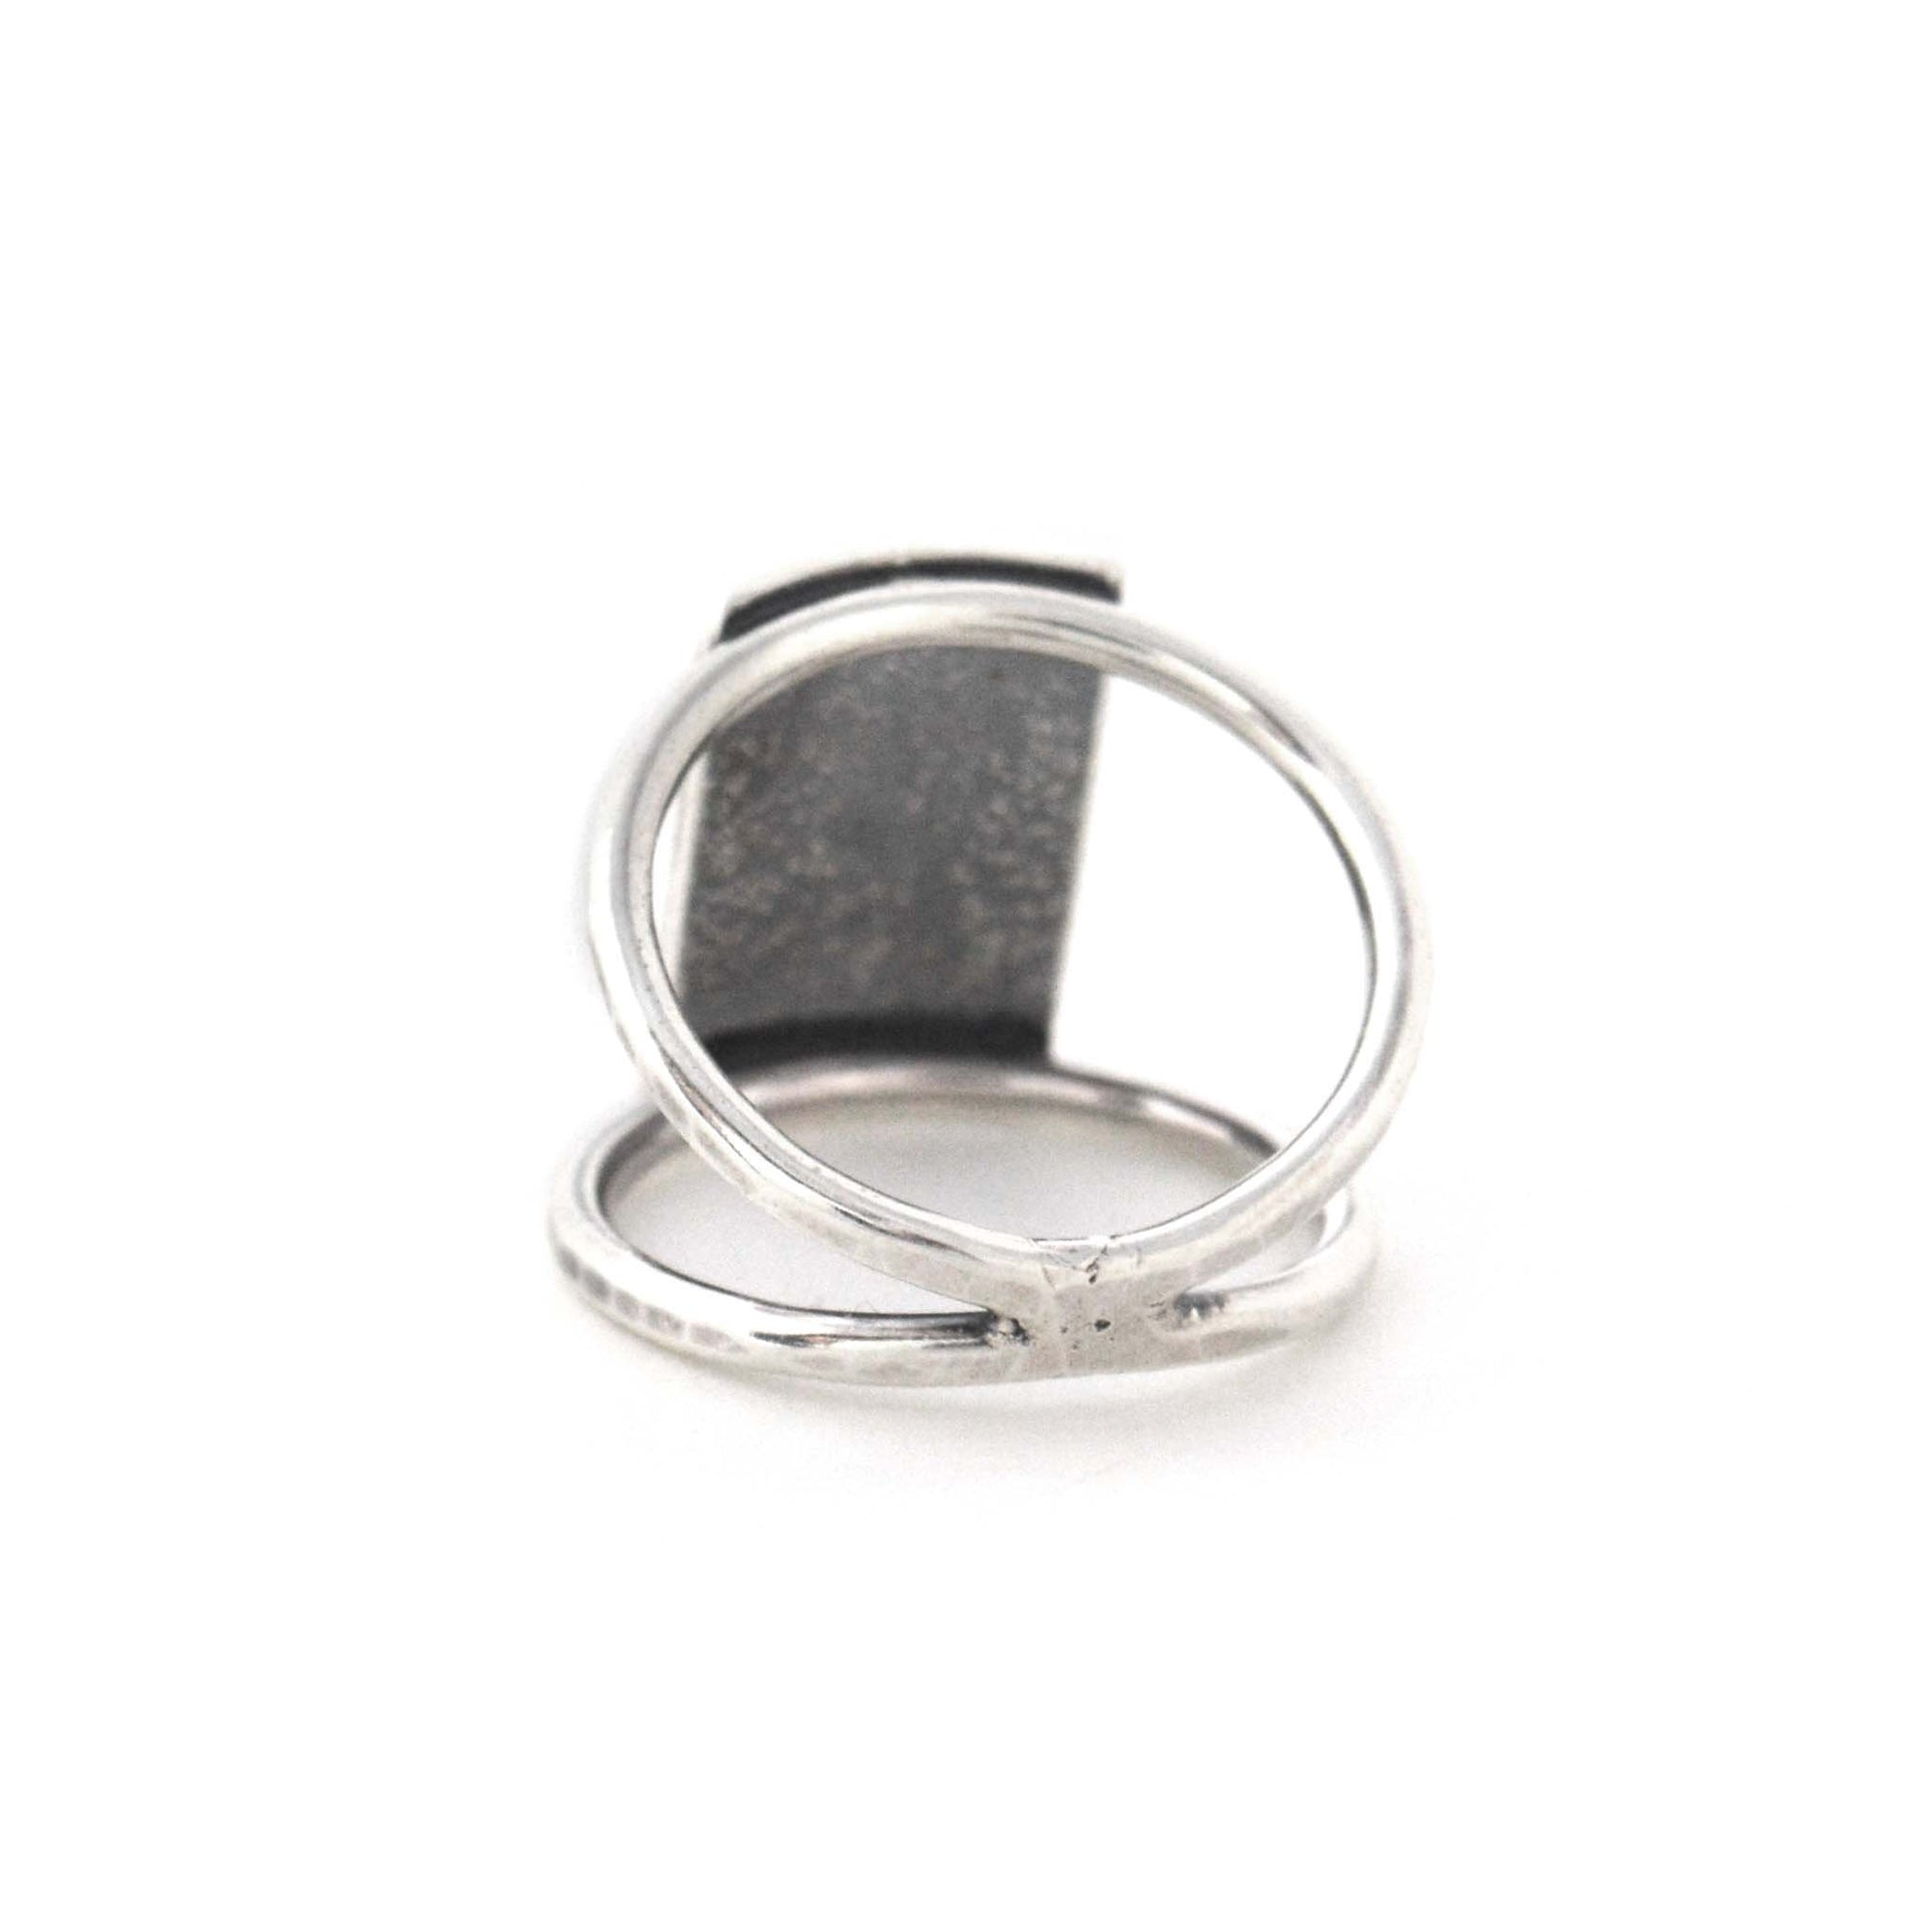 Moonrise on the Lake Ring - Ring  Select Size  4 3882 - handmade by Beth Millner Jewelry